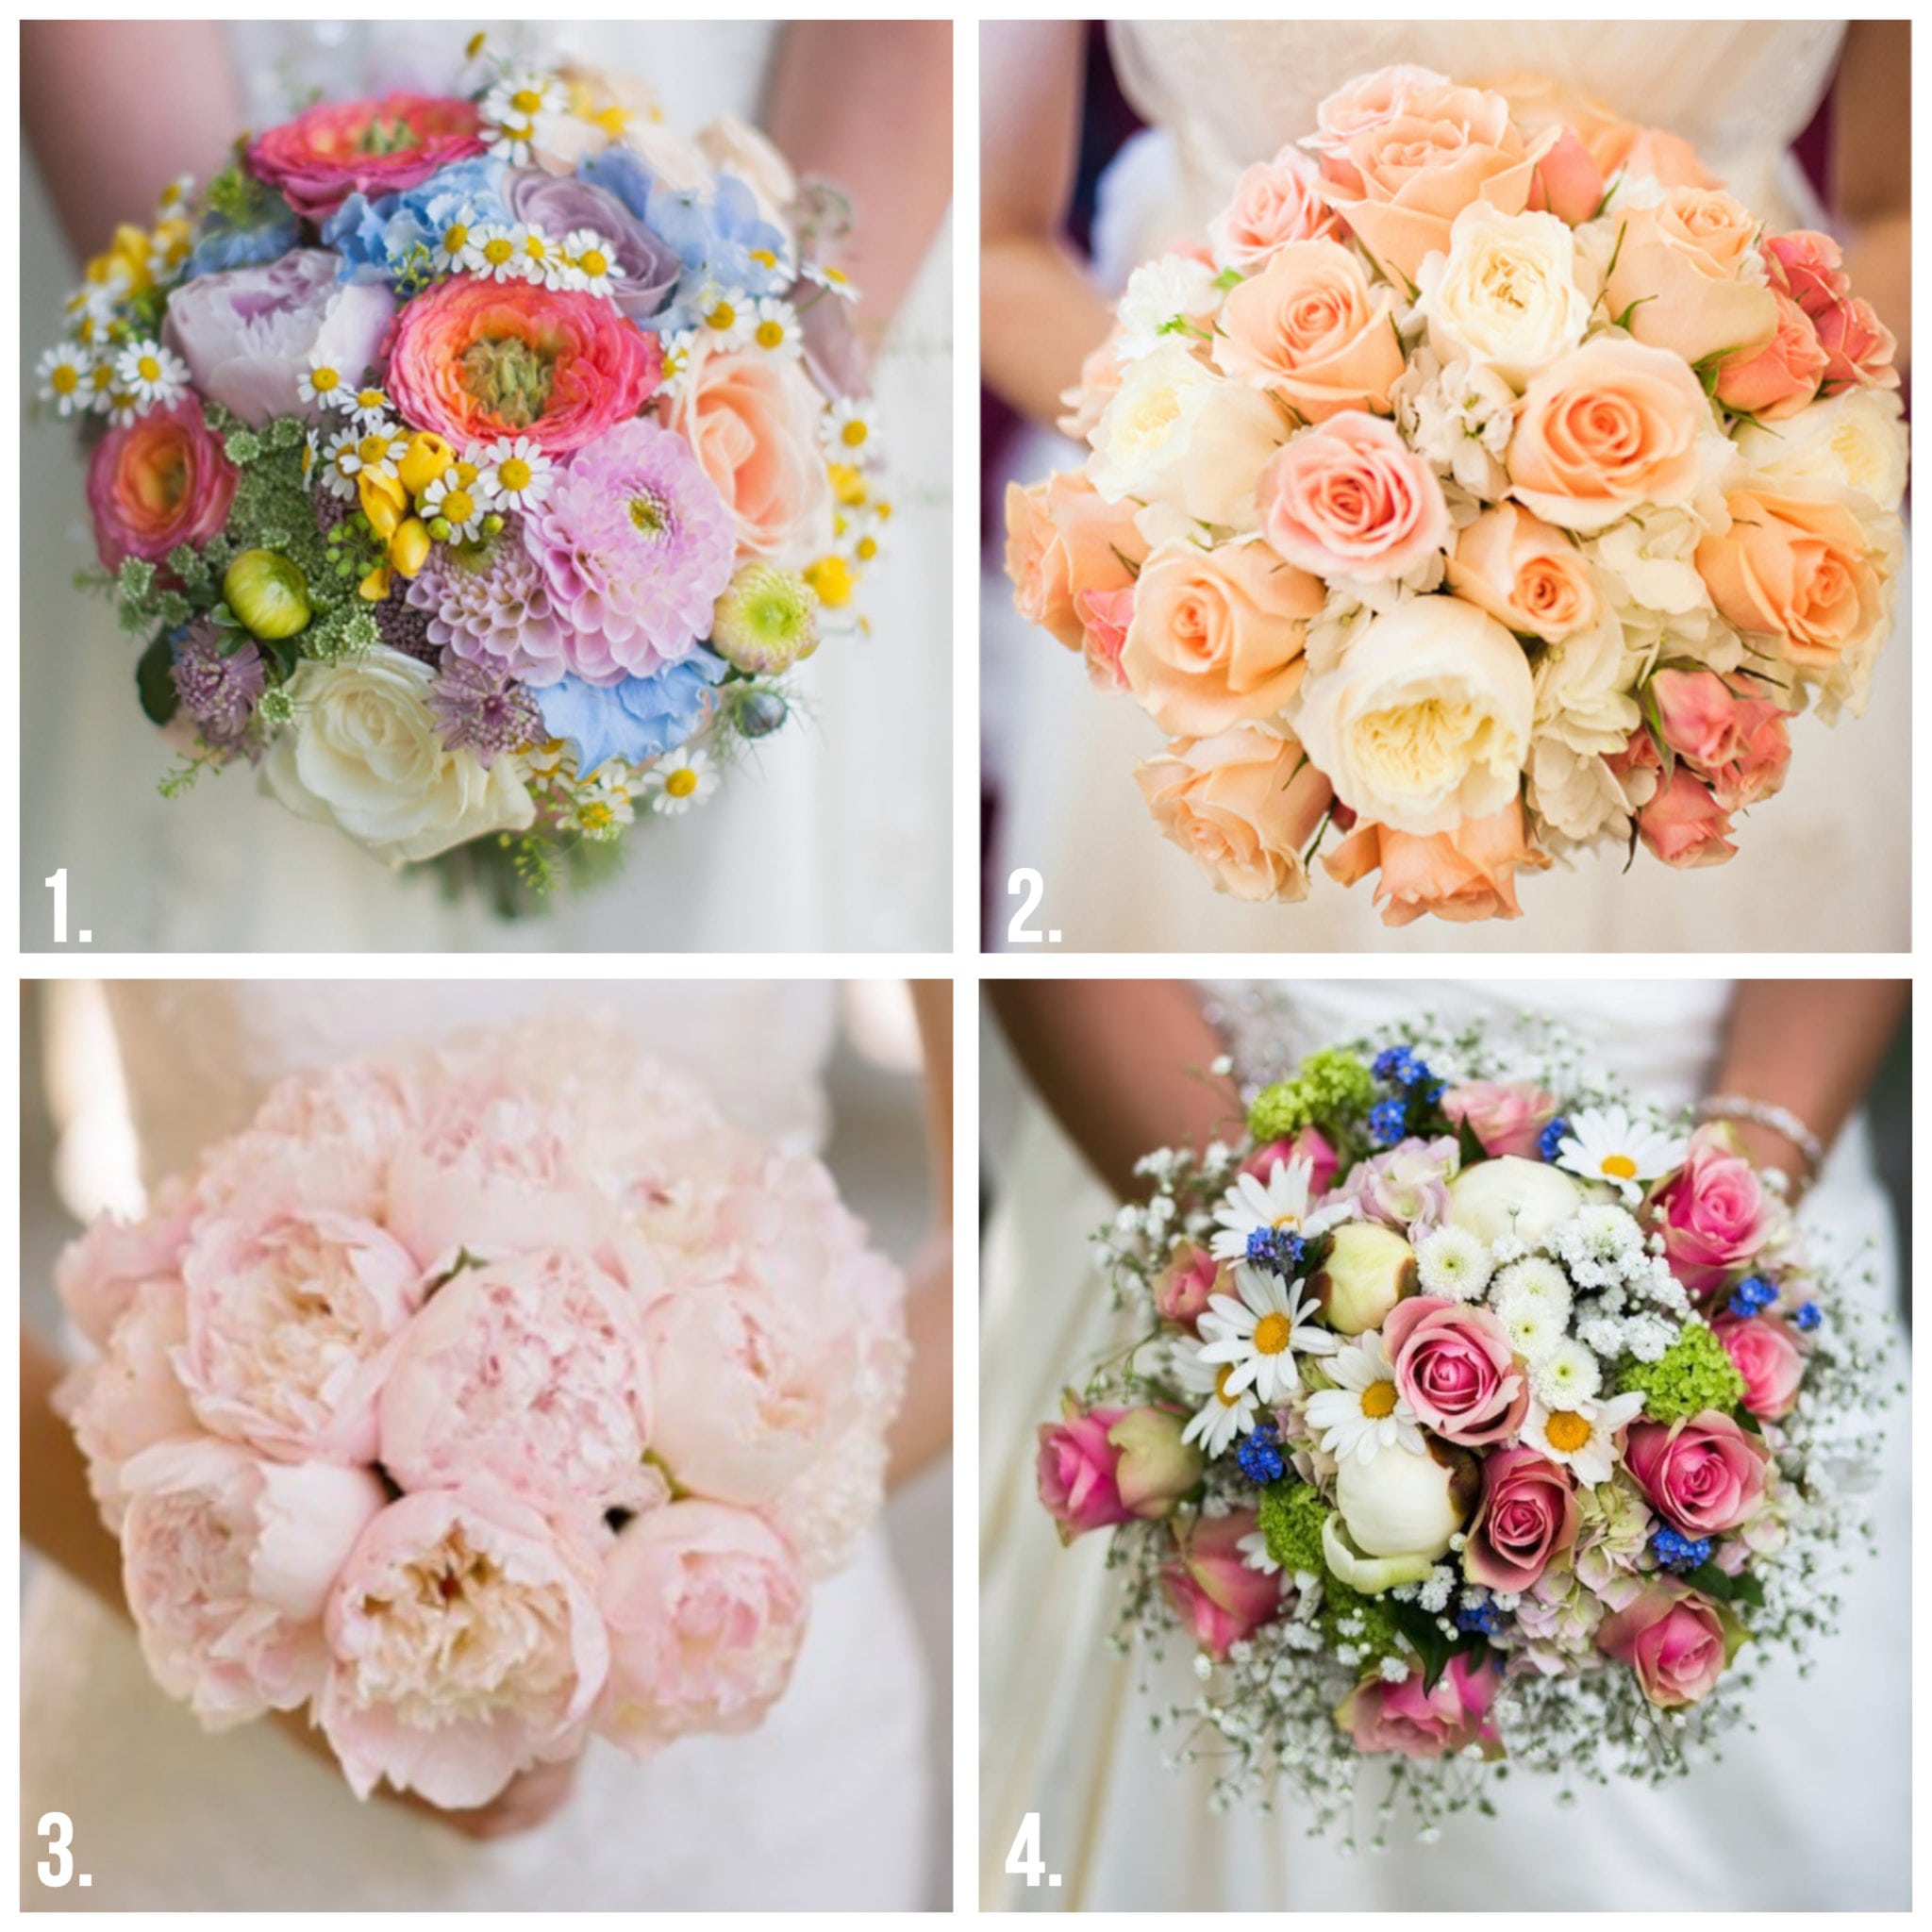 wedding bouquets - four panel image of round bouquets